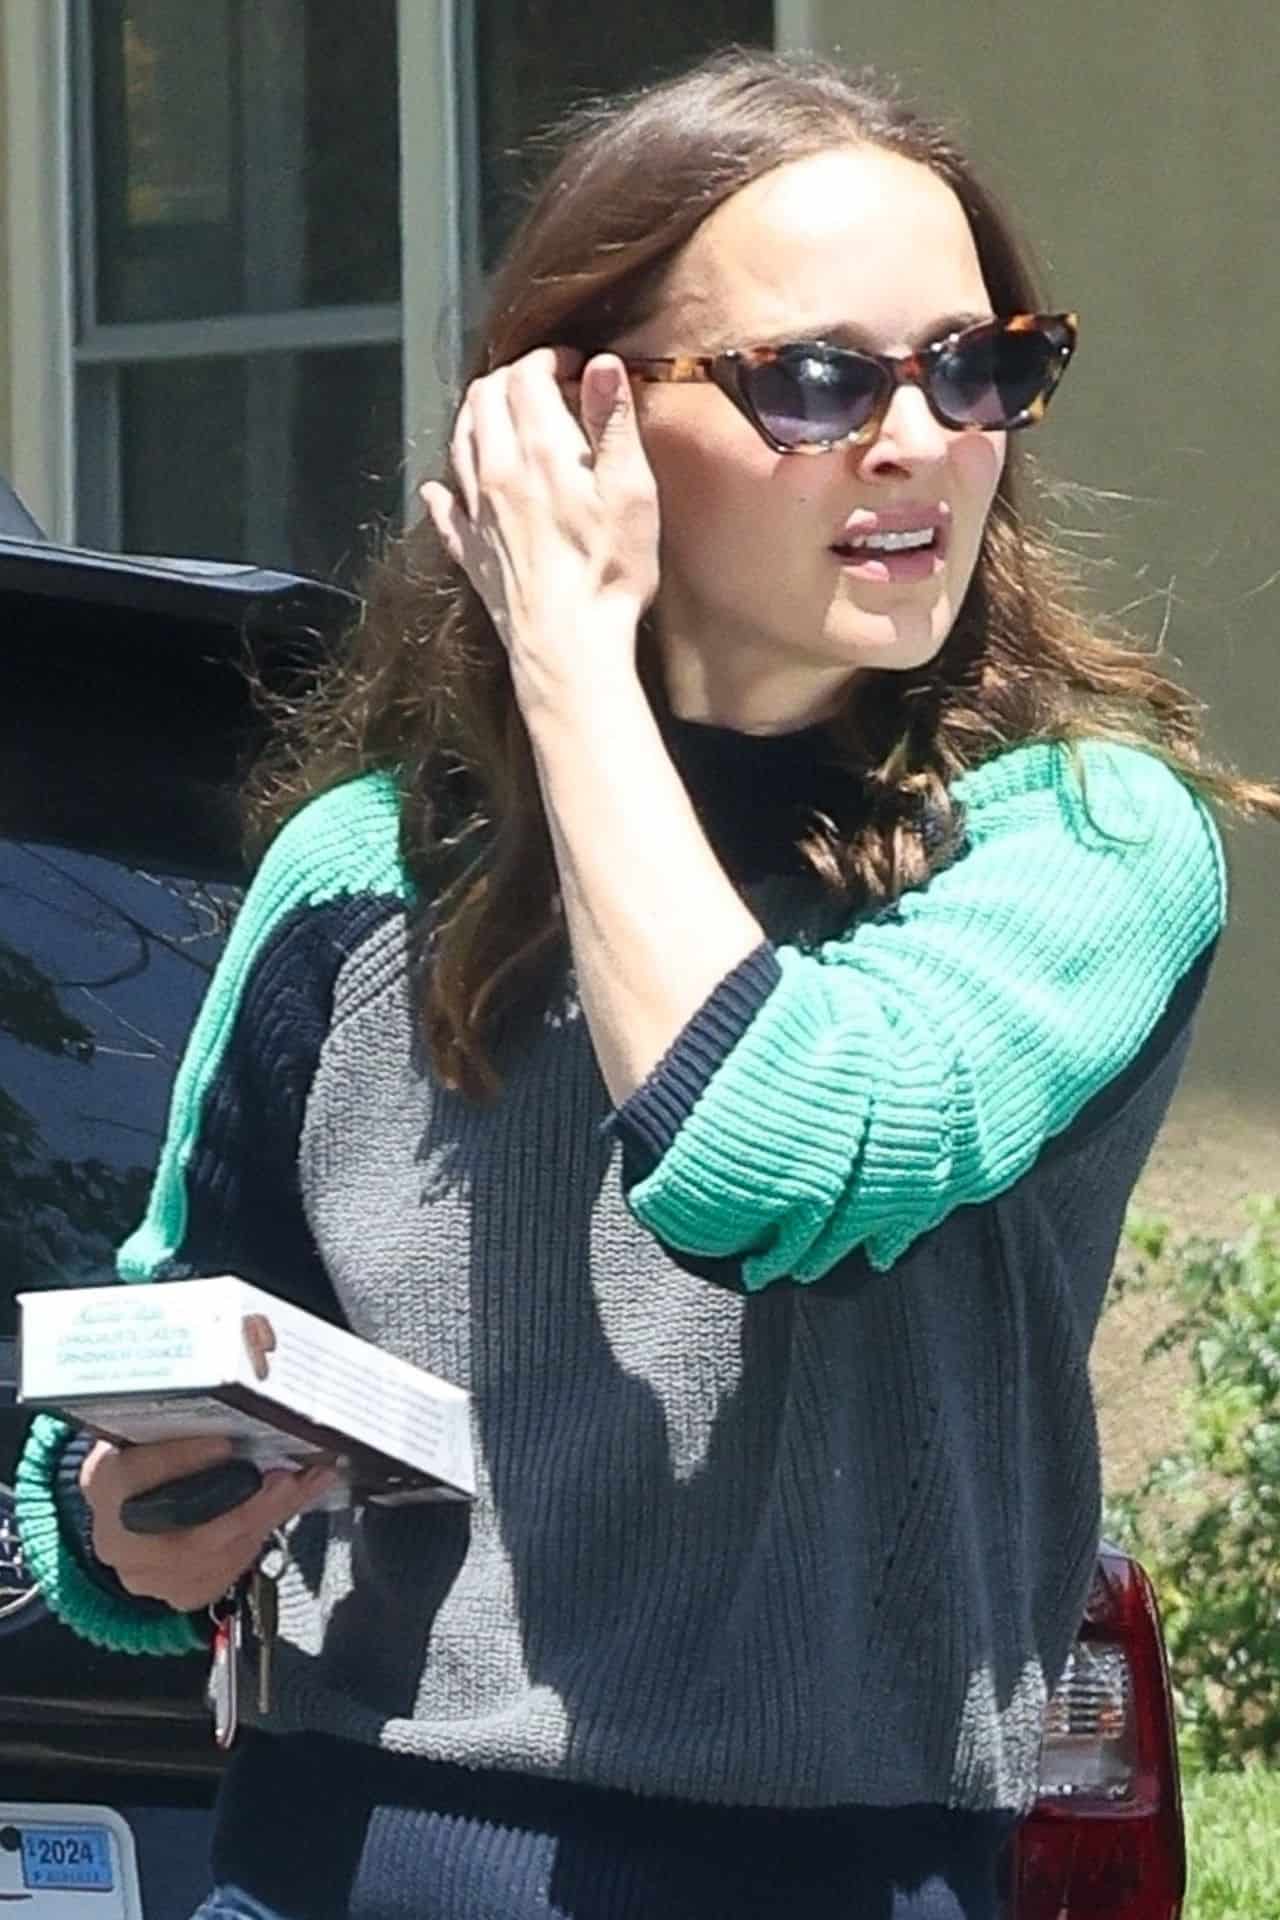 Natalie Portman in Short Shorts and a Sweater Visits a Friend